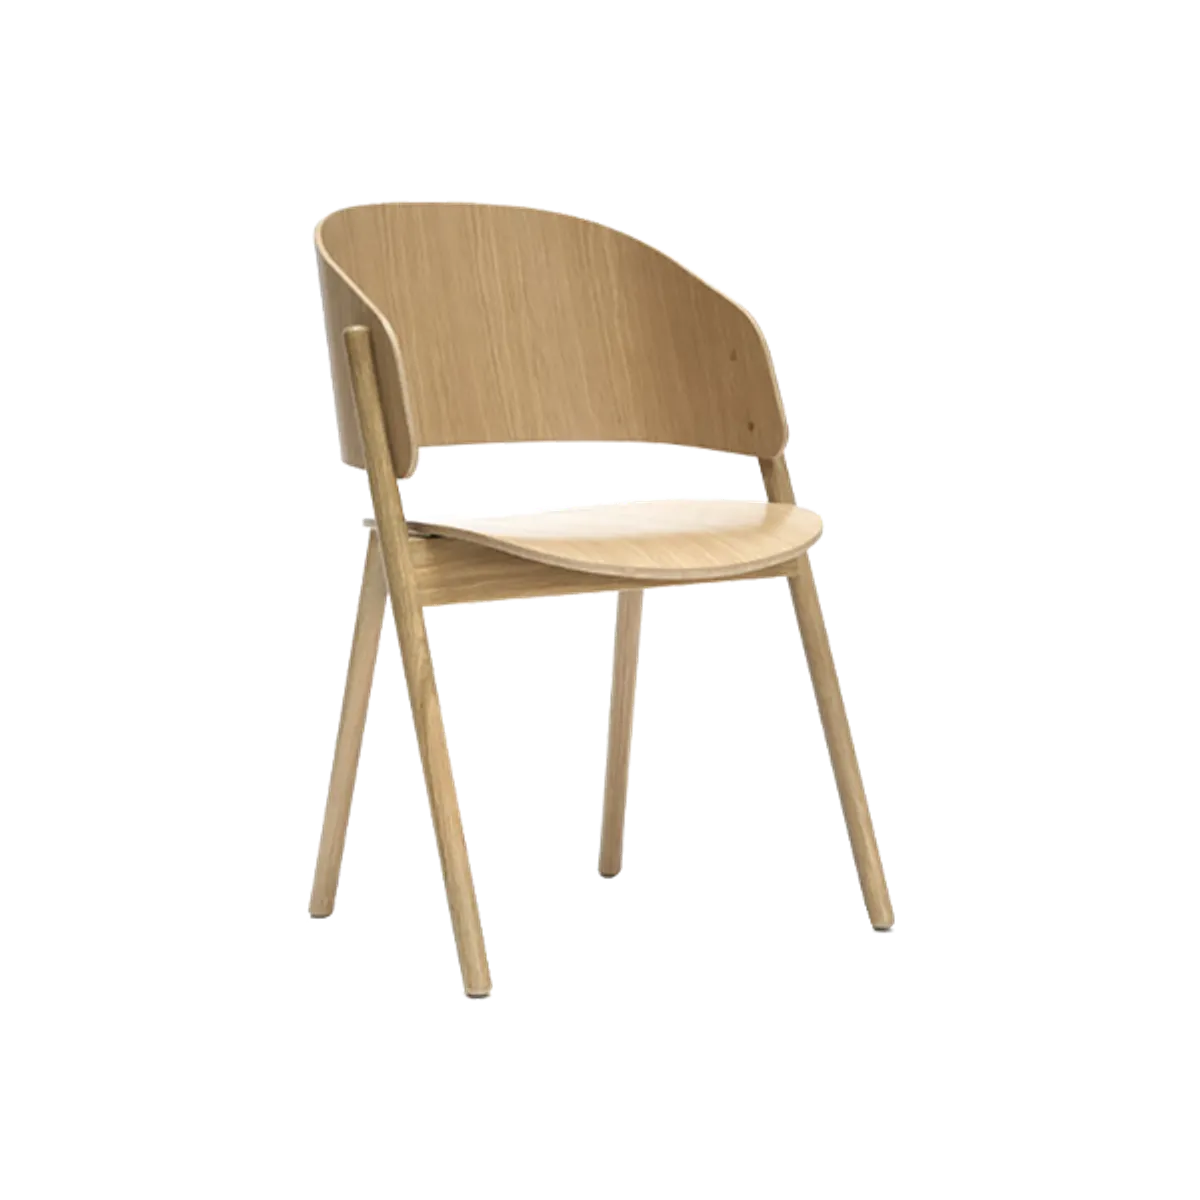 Web Karma Chair In Natural Wood 003 Recovered